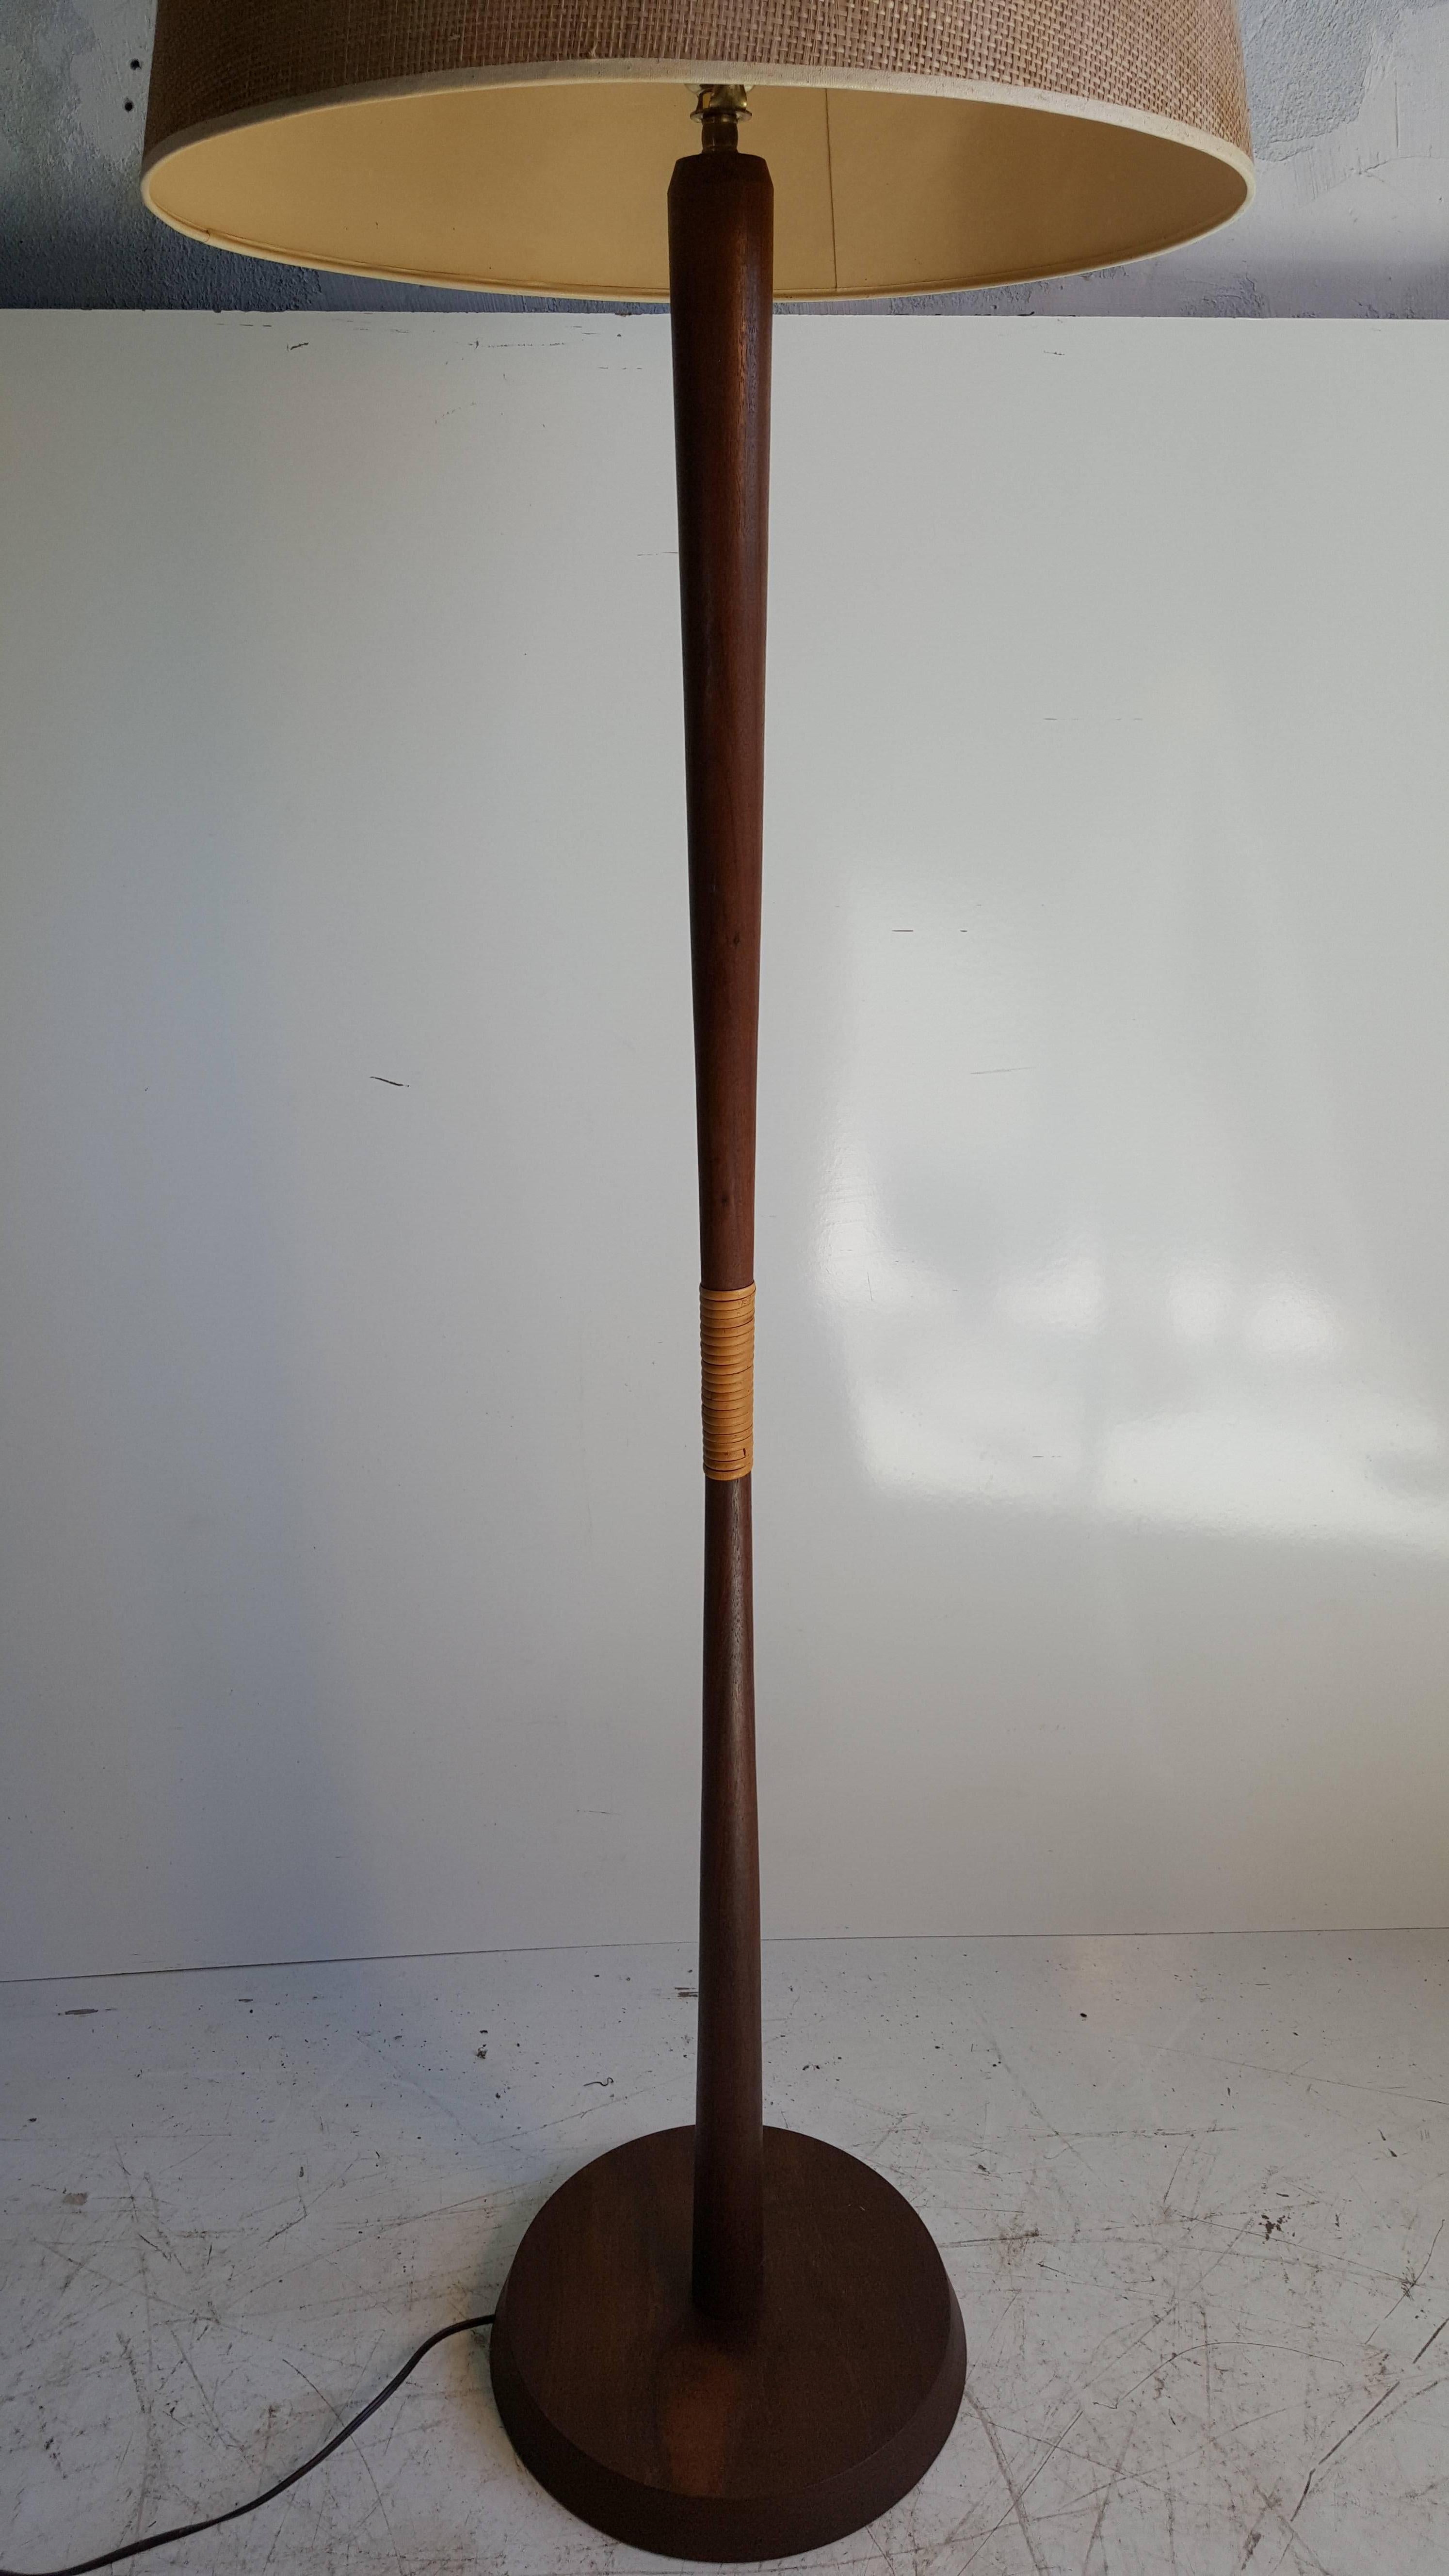 Classic turned walnut Danish modern taper floor lamp. Retains original shade in great condition, as well as simple reed wrap center detailing.